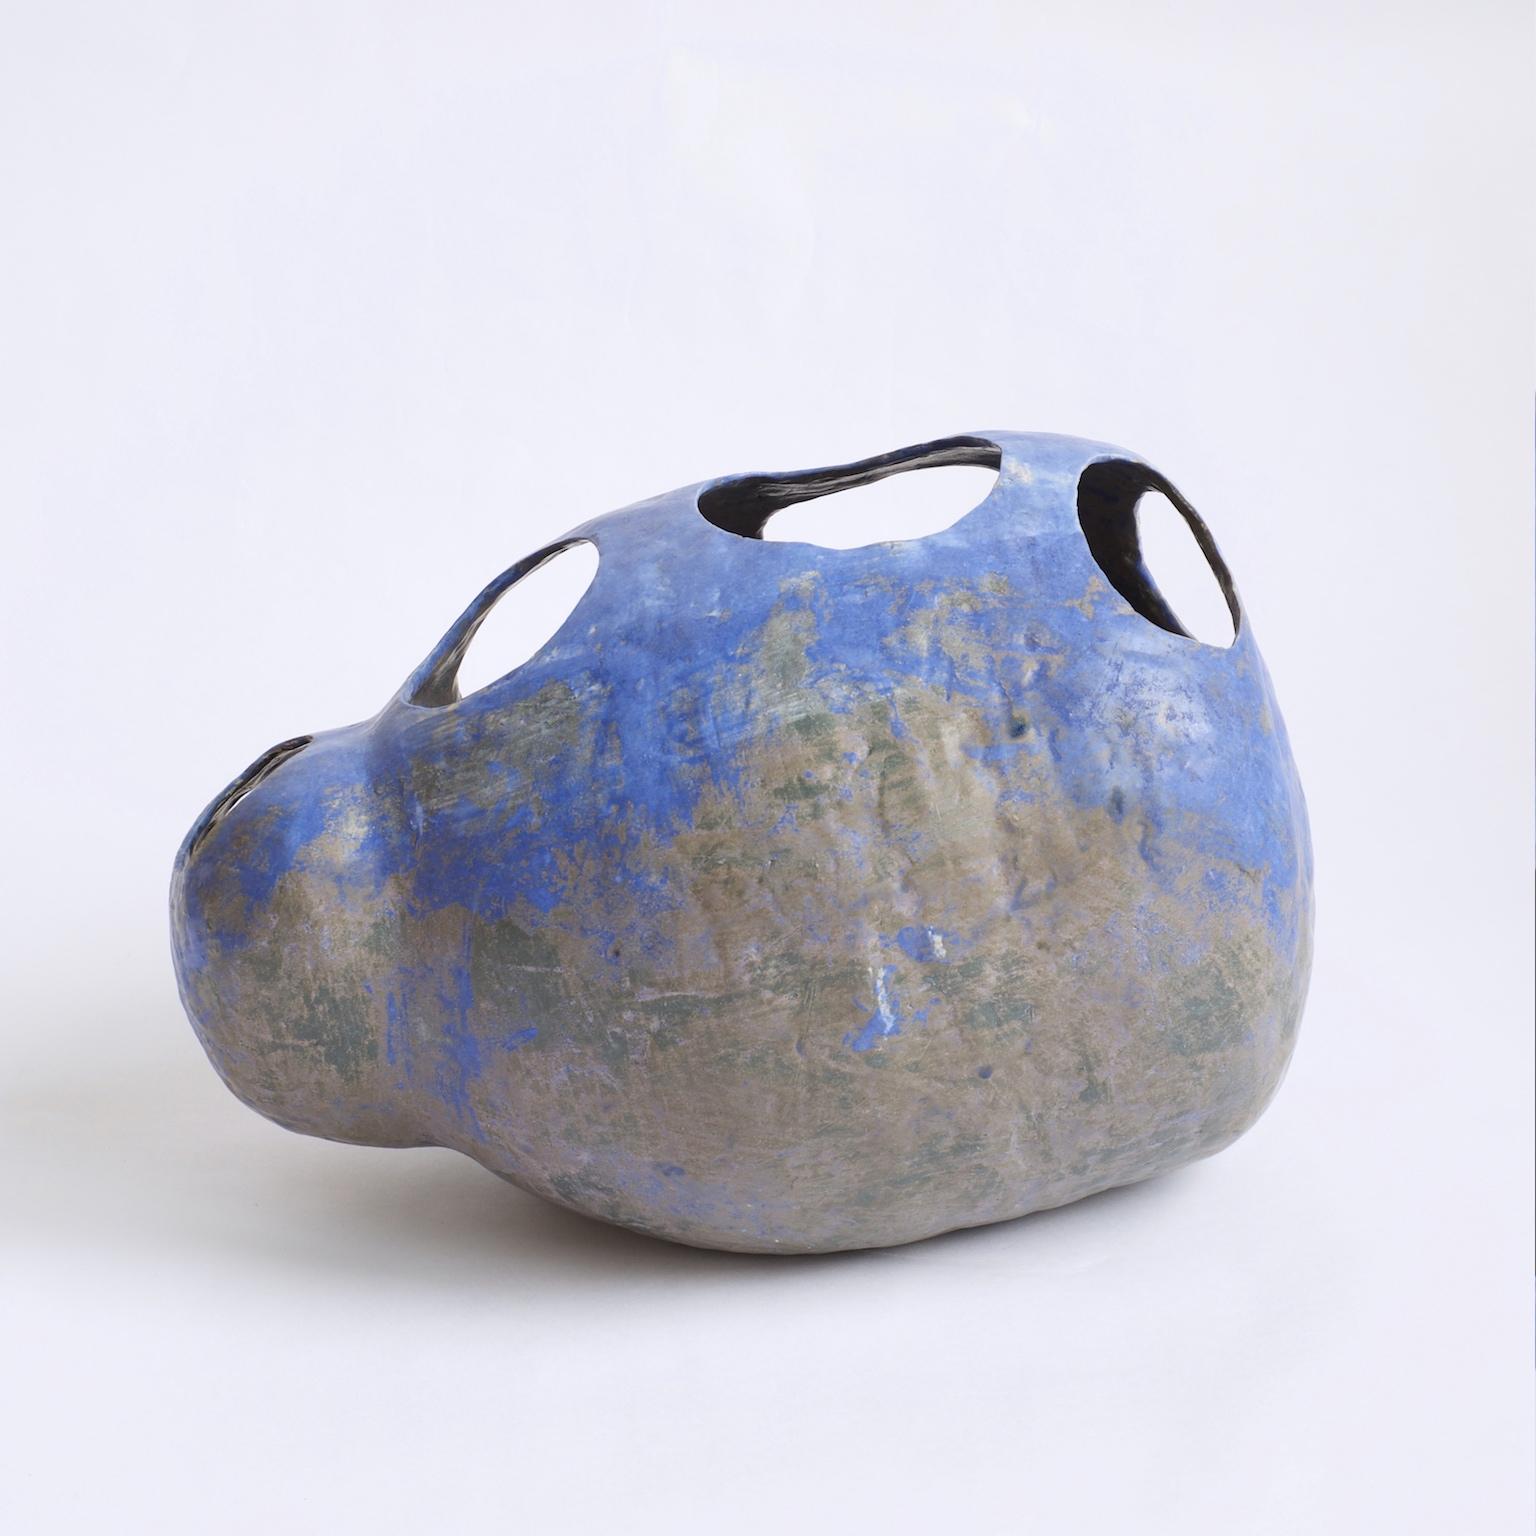 Fired Hand-Built Ceramic Contemporary Sculpture in Cobalt Blue Oxide by Yuko Nishikawa